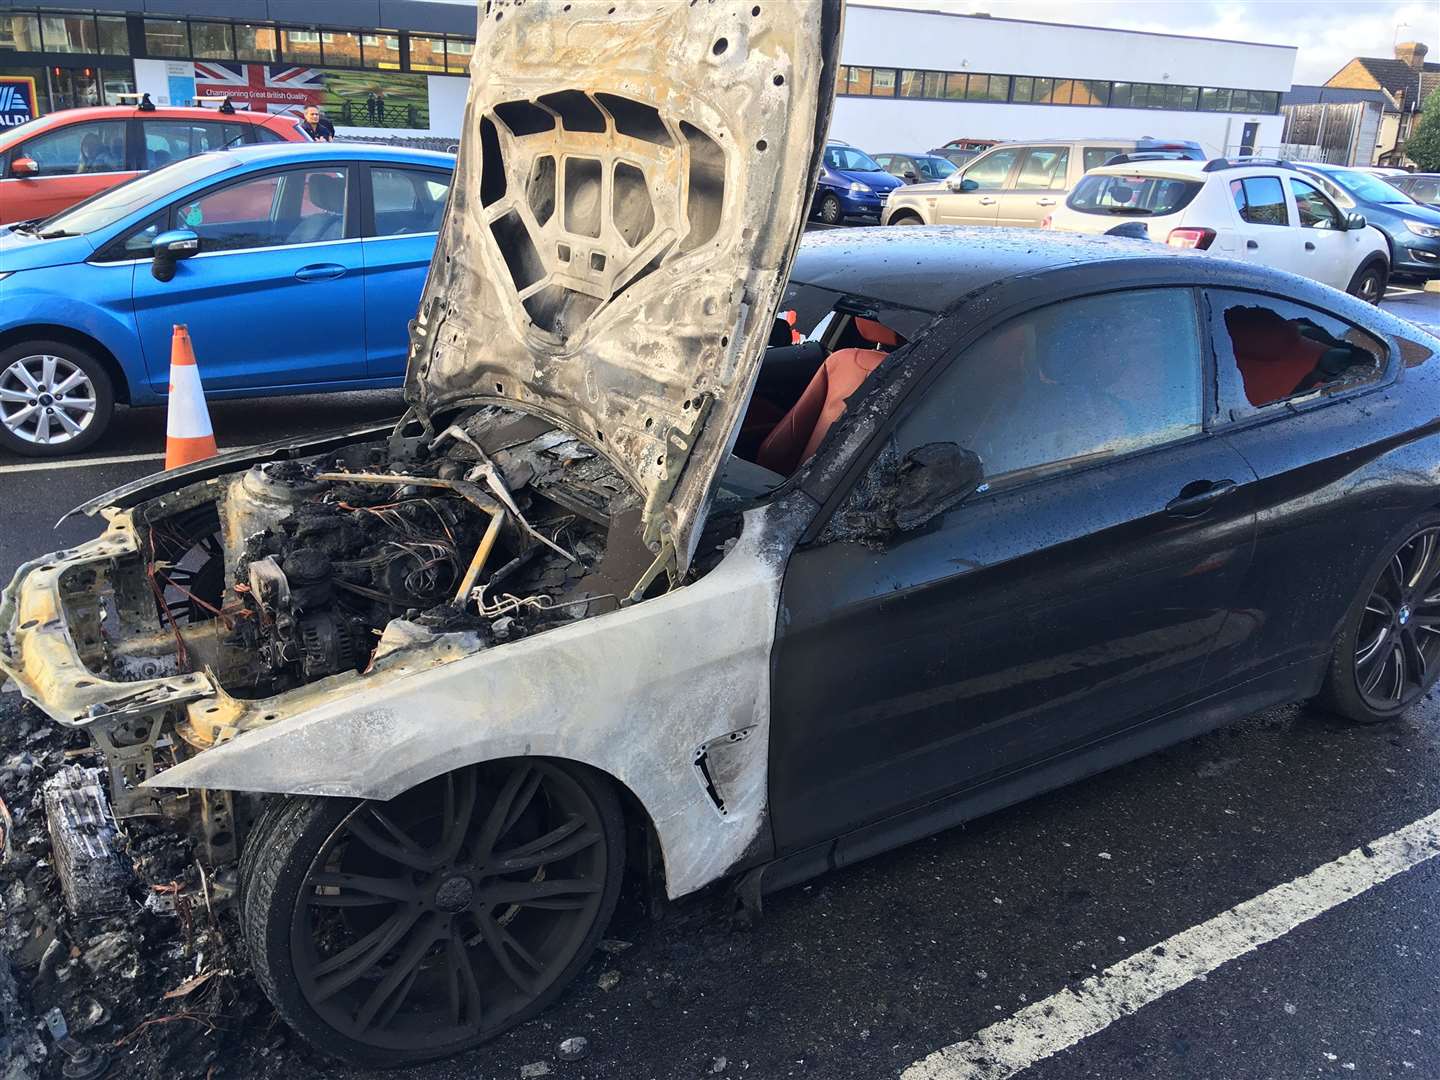 The damage to the car, found in Aldi car park in Wheeler Street, is extensive